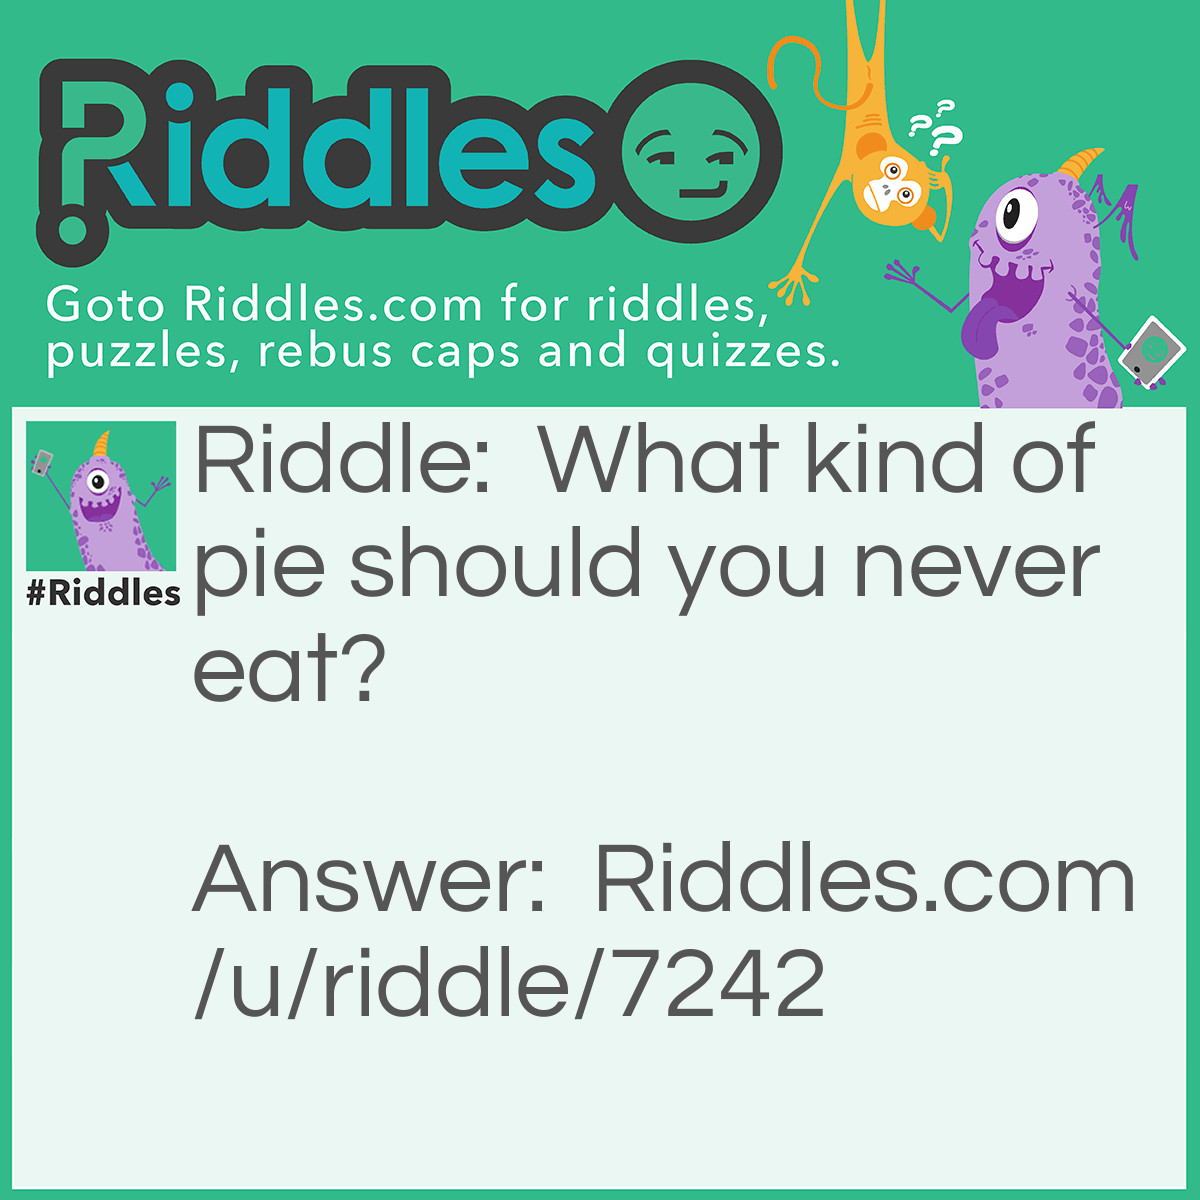 Riddle: What kind of pie should you never eat? Answer: Magpie.